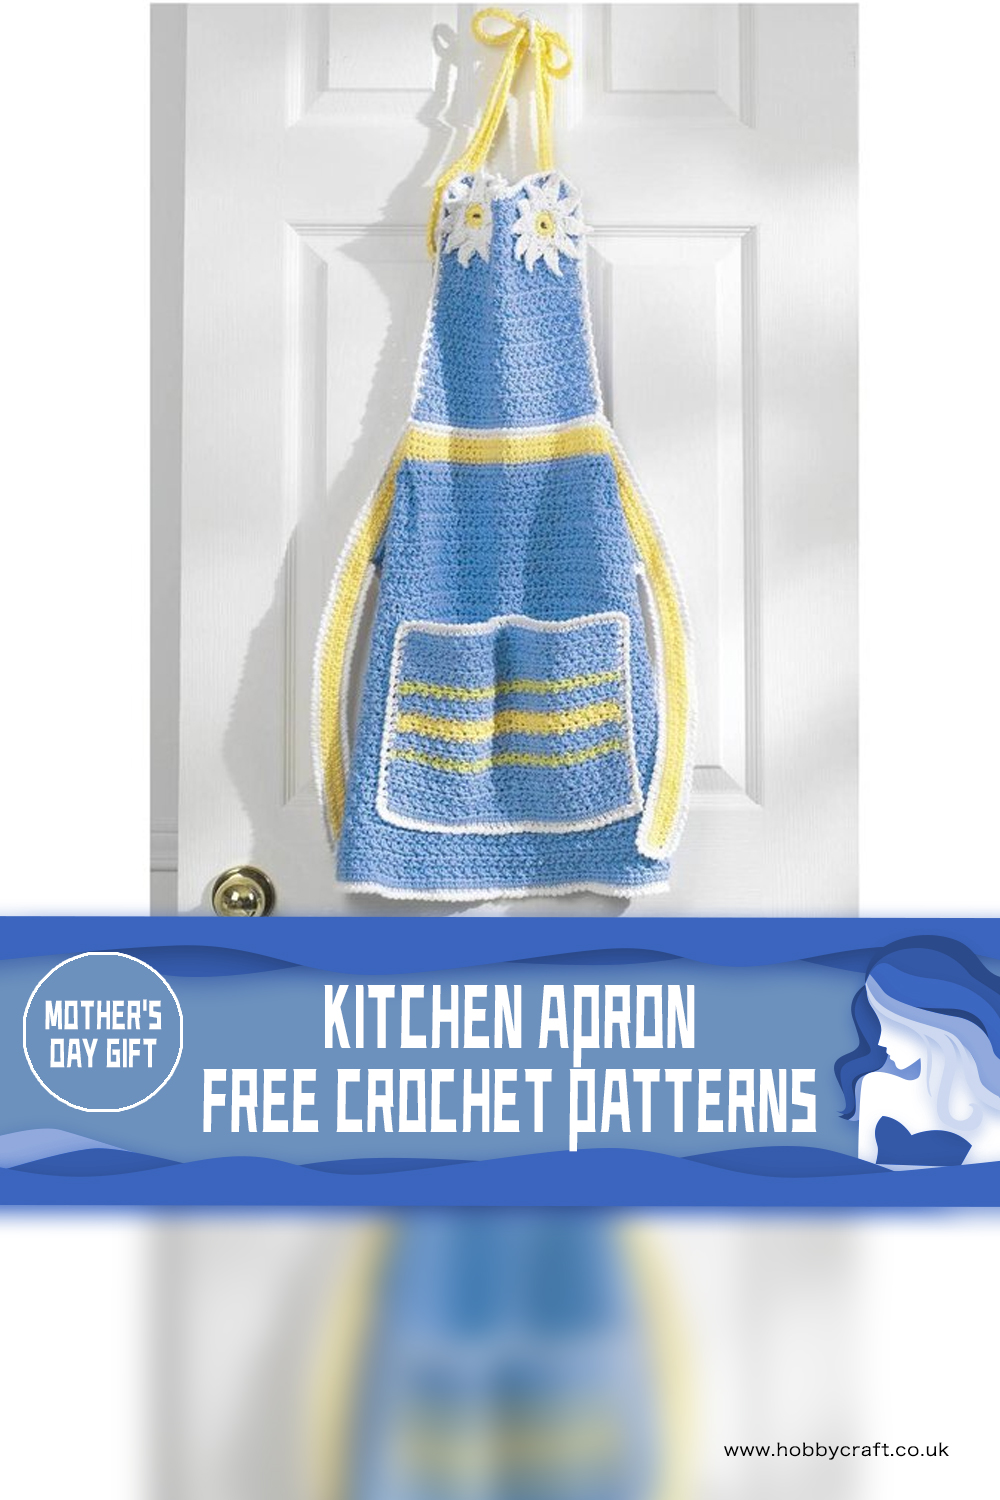 Mother's Day Gift - Kitchen Apron Crochet Patterns free